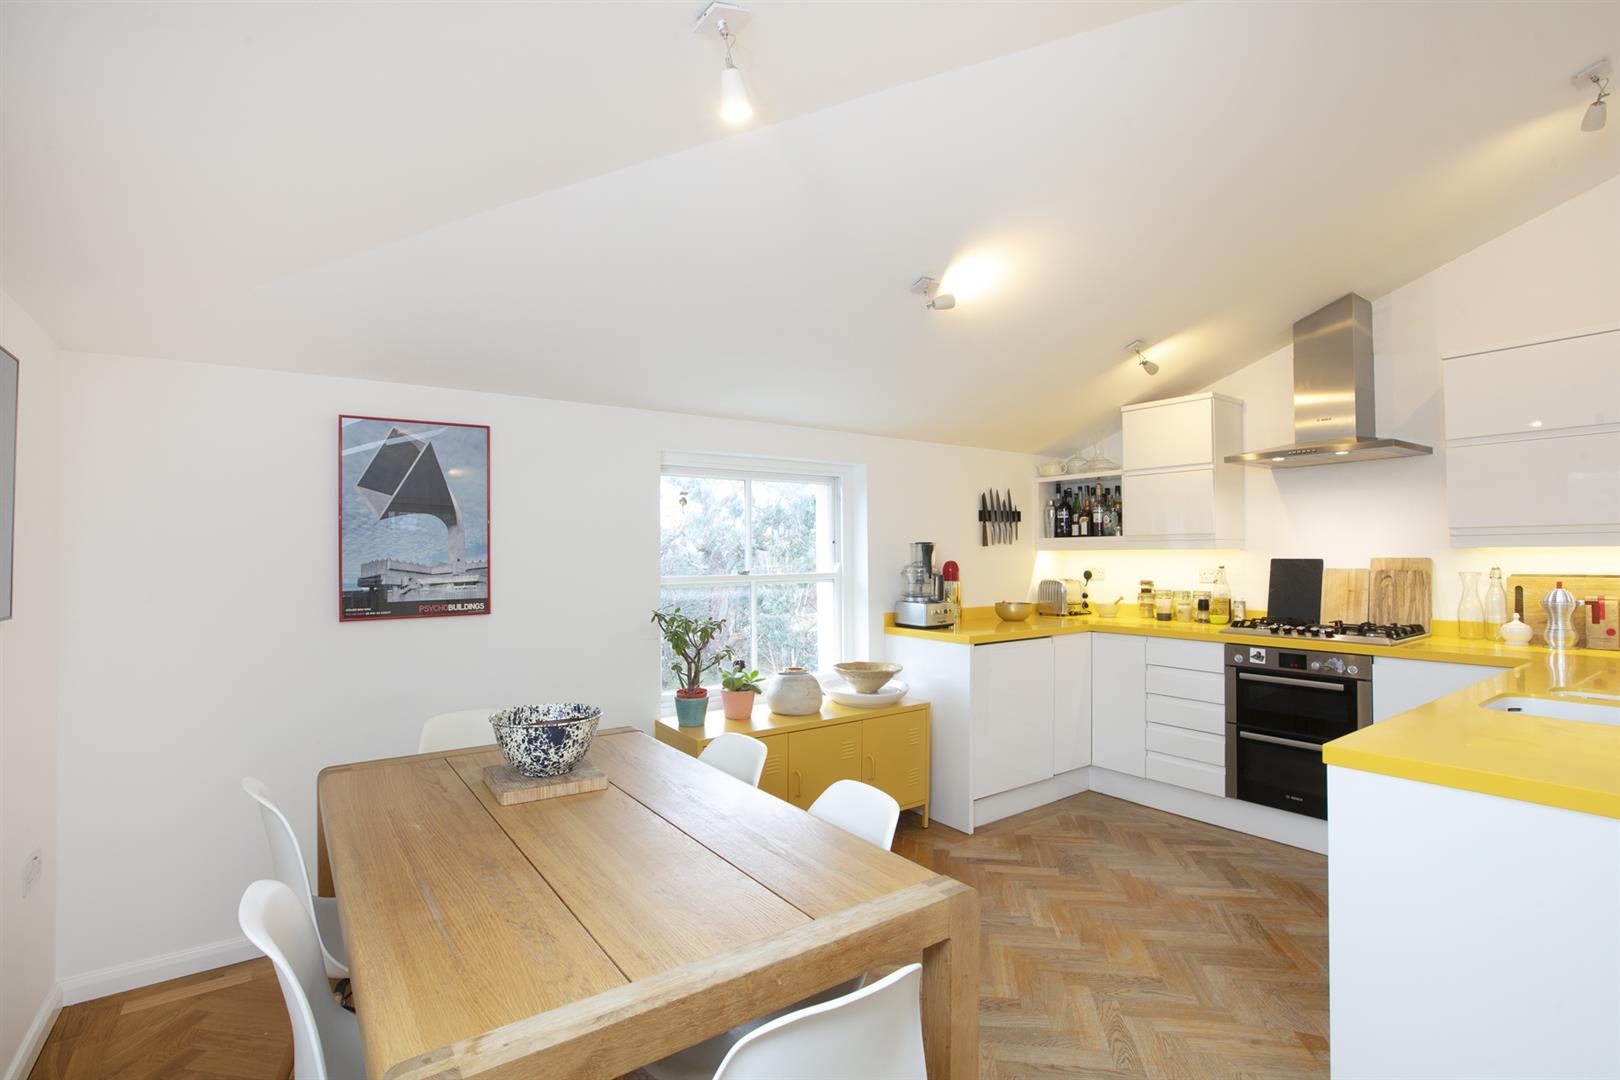 Flat - Conversion Under Offer in Holly Grove, Peckham, SE15 893 view19